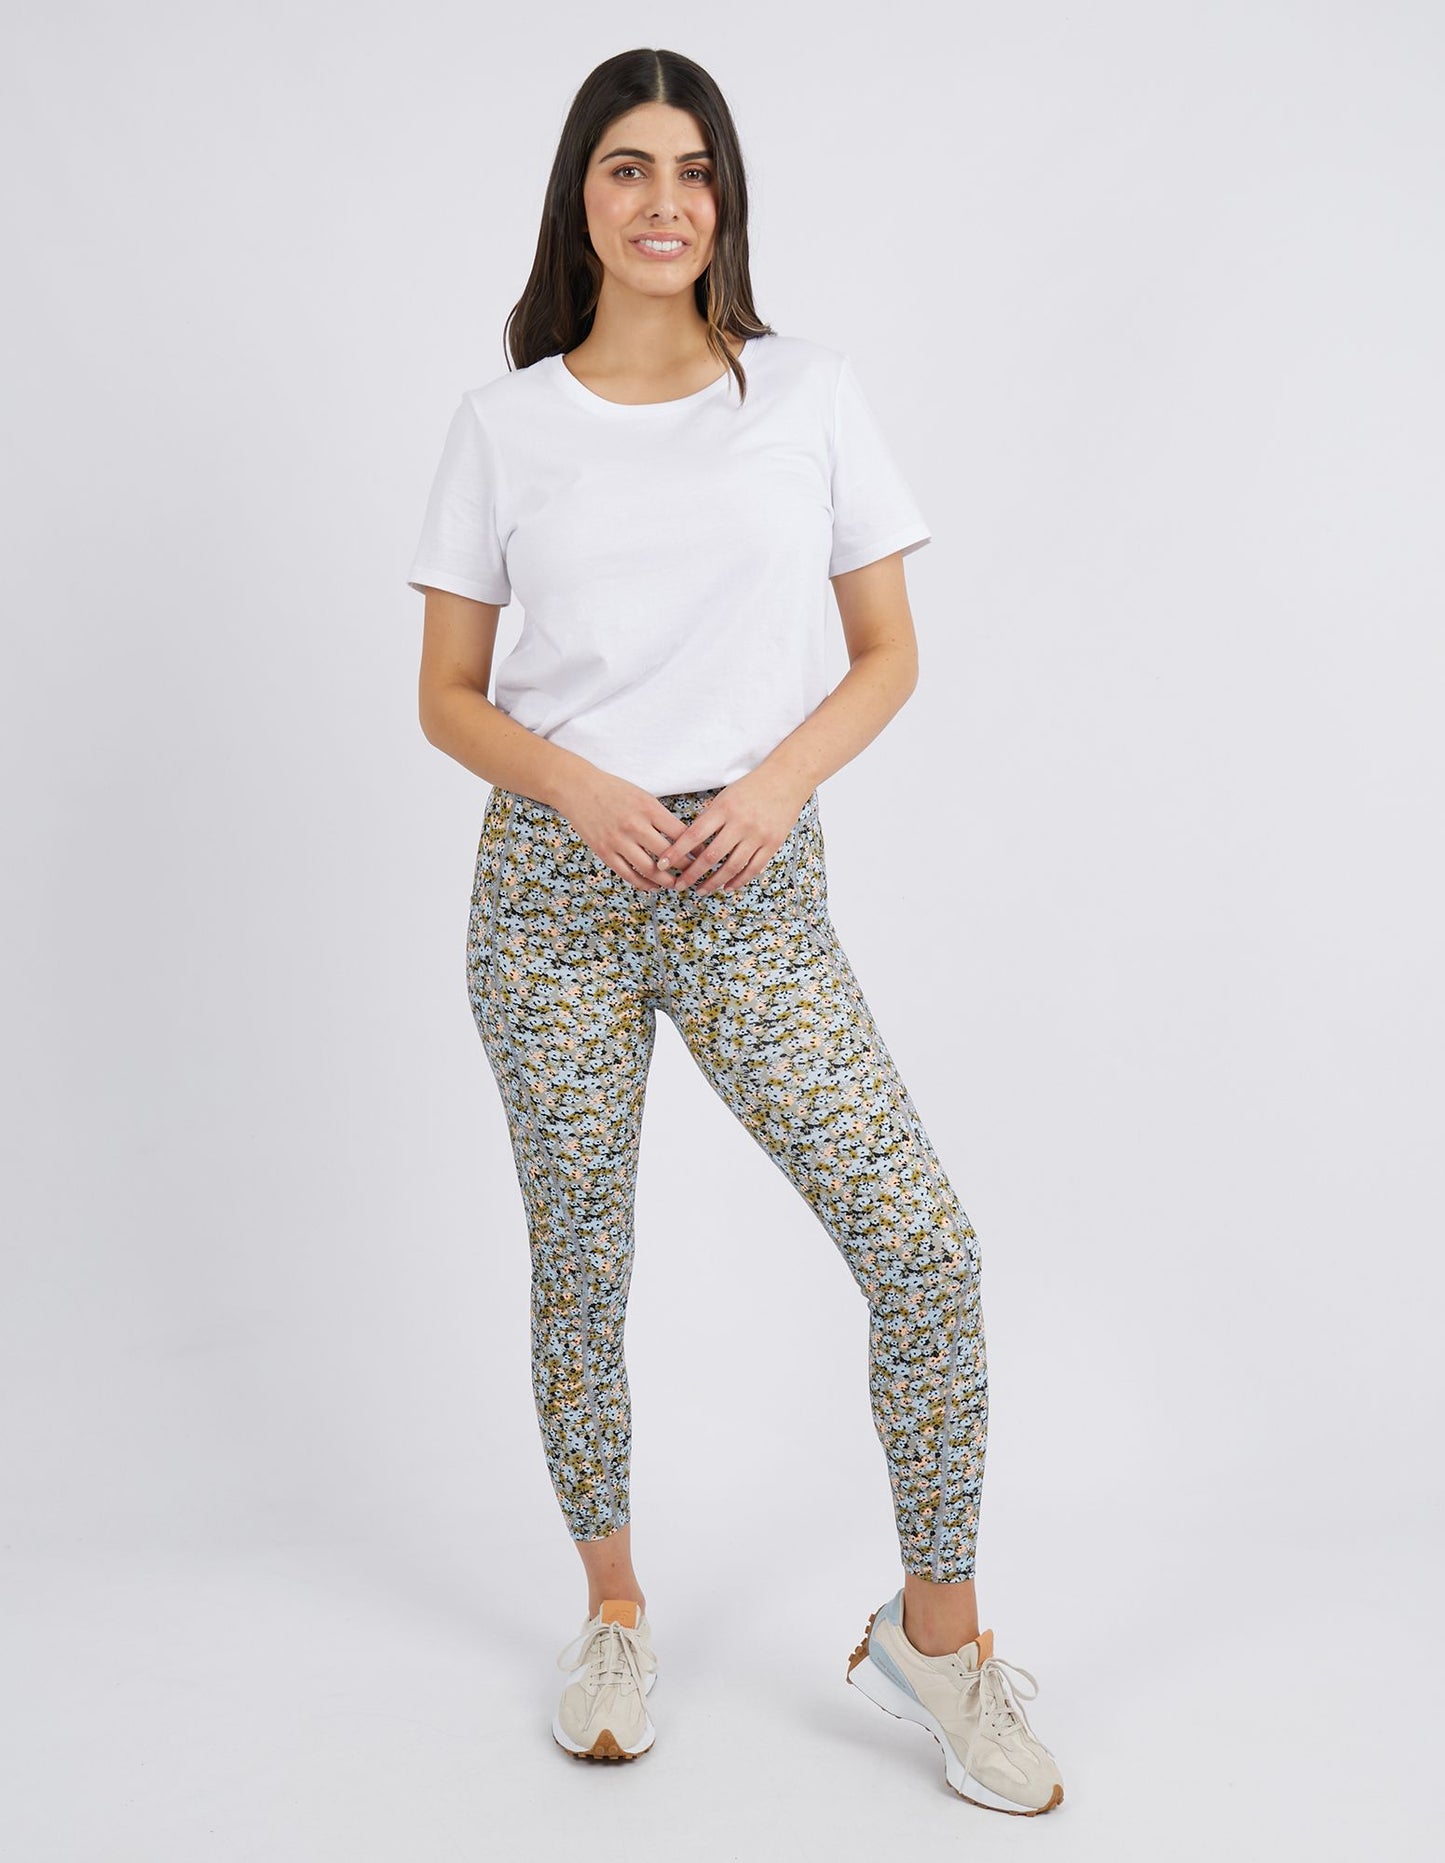 F-Power Legging - Multicolour Floral - Foxwood - FUDGE Gifts Home Lifestyle